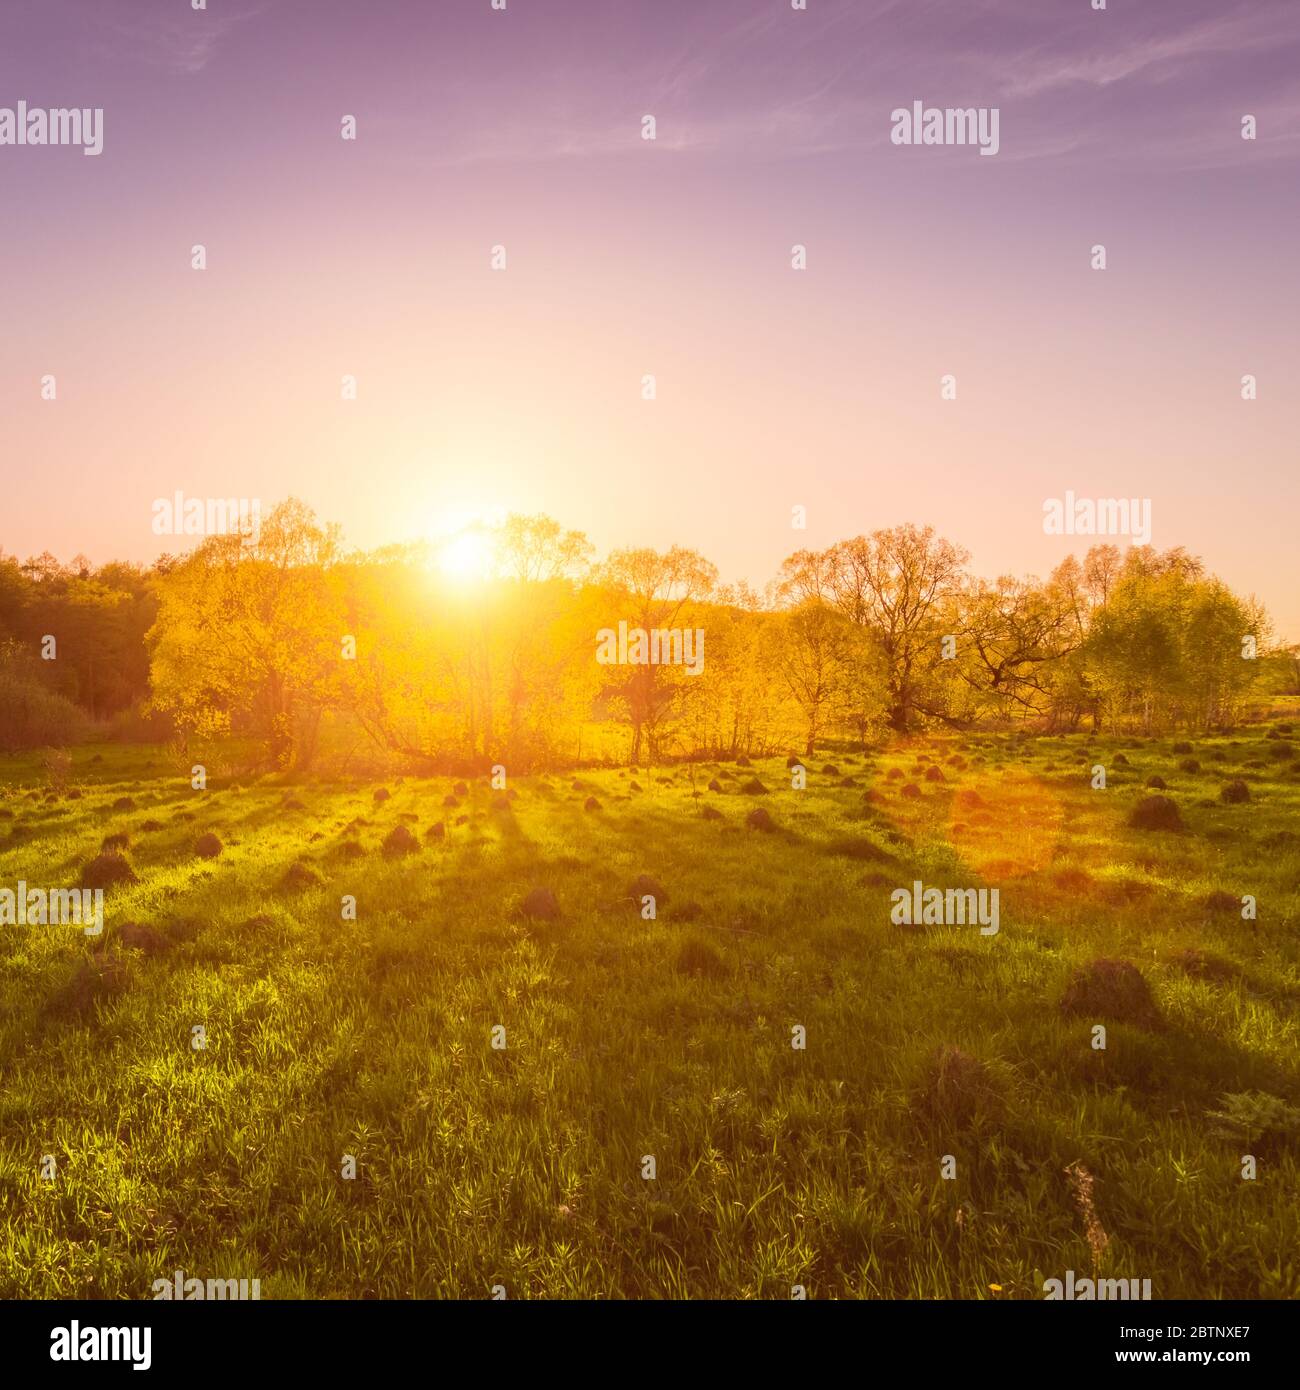 Sunset or dawn in a spring field with green grass, a path with tire marks, willows and a clear sky. The sun leaving deep shadows. Stock Photo